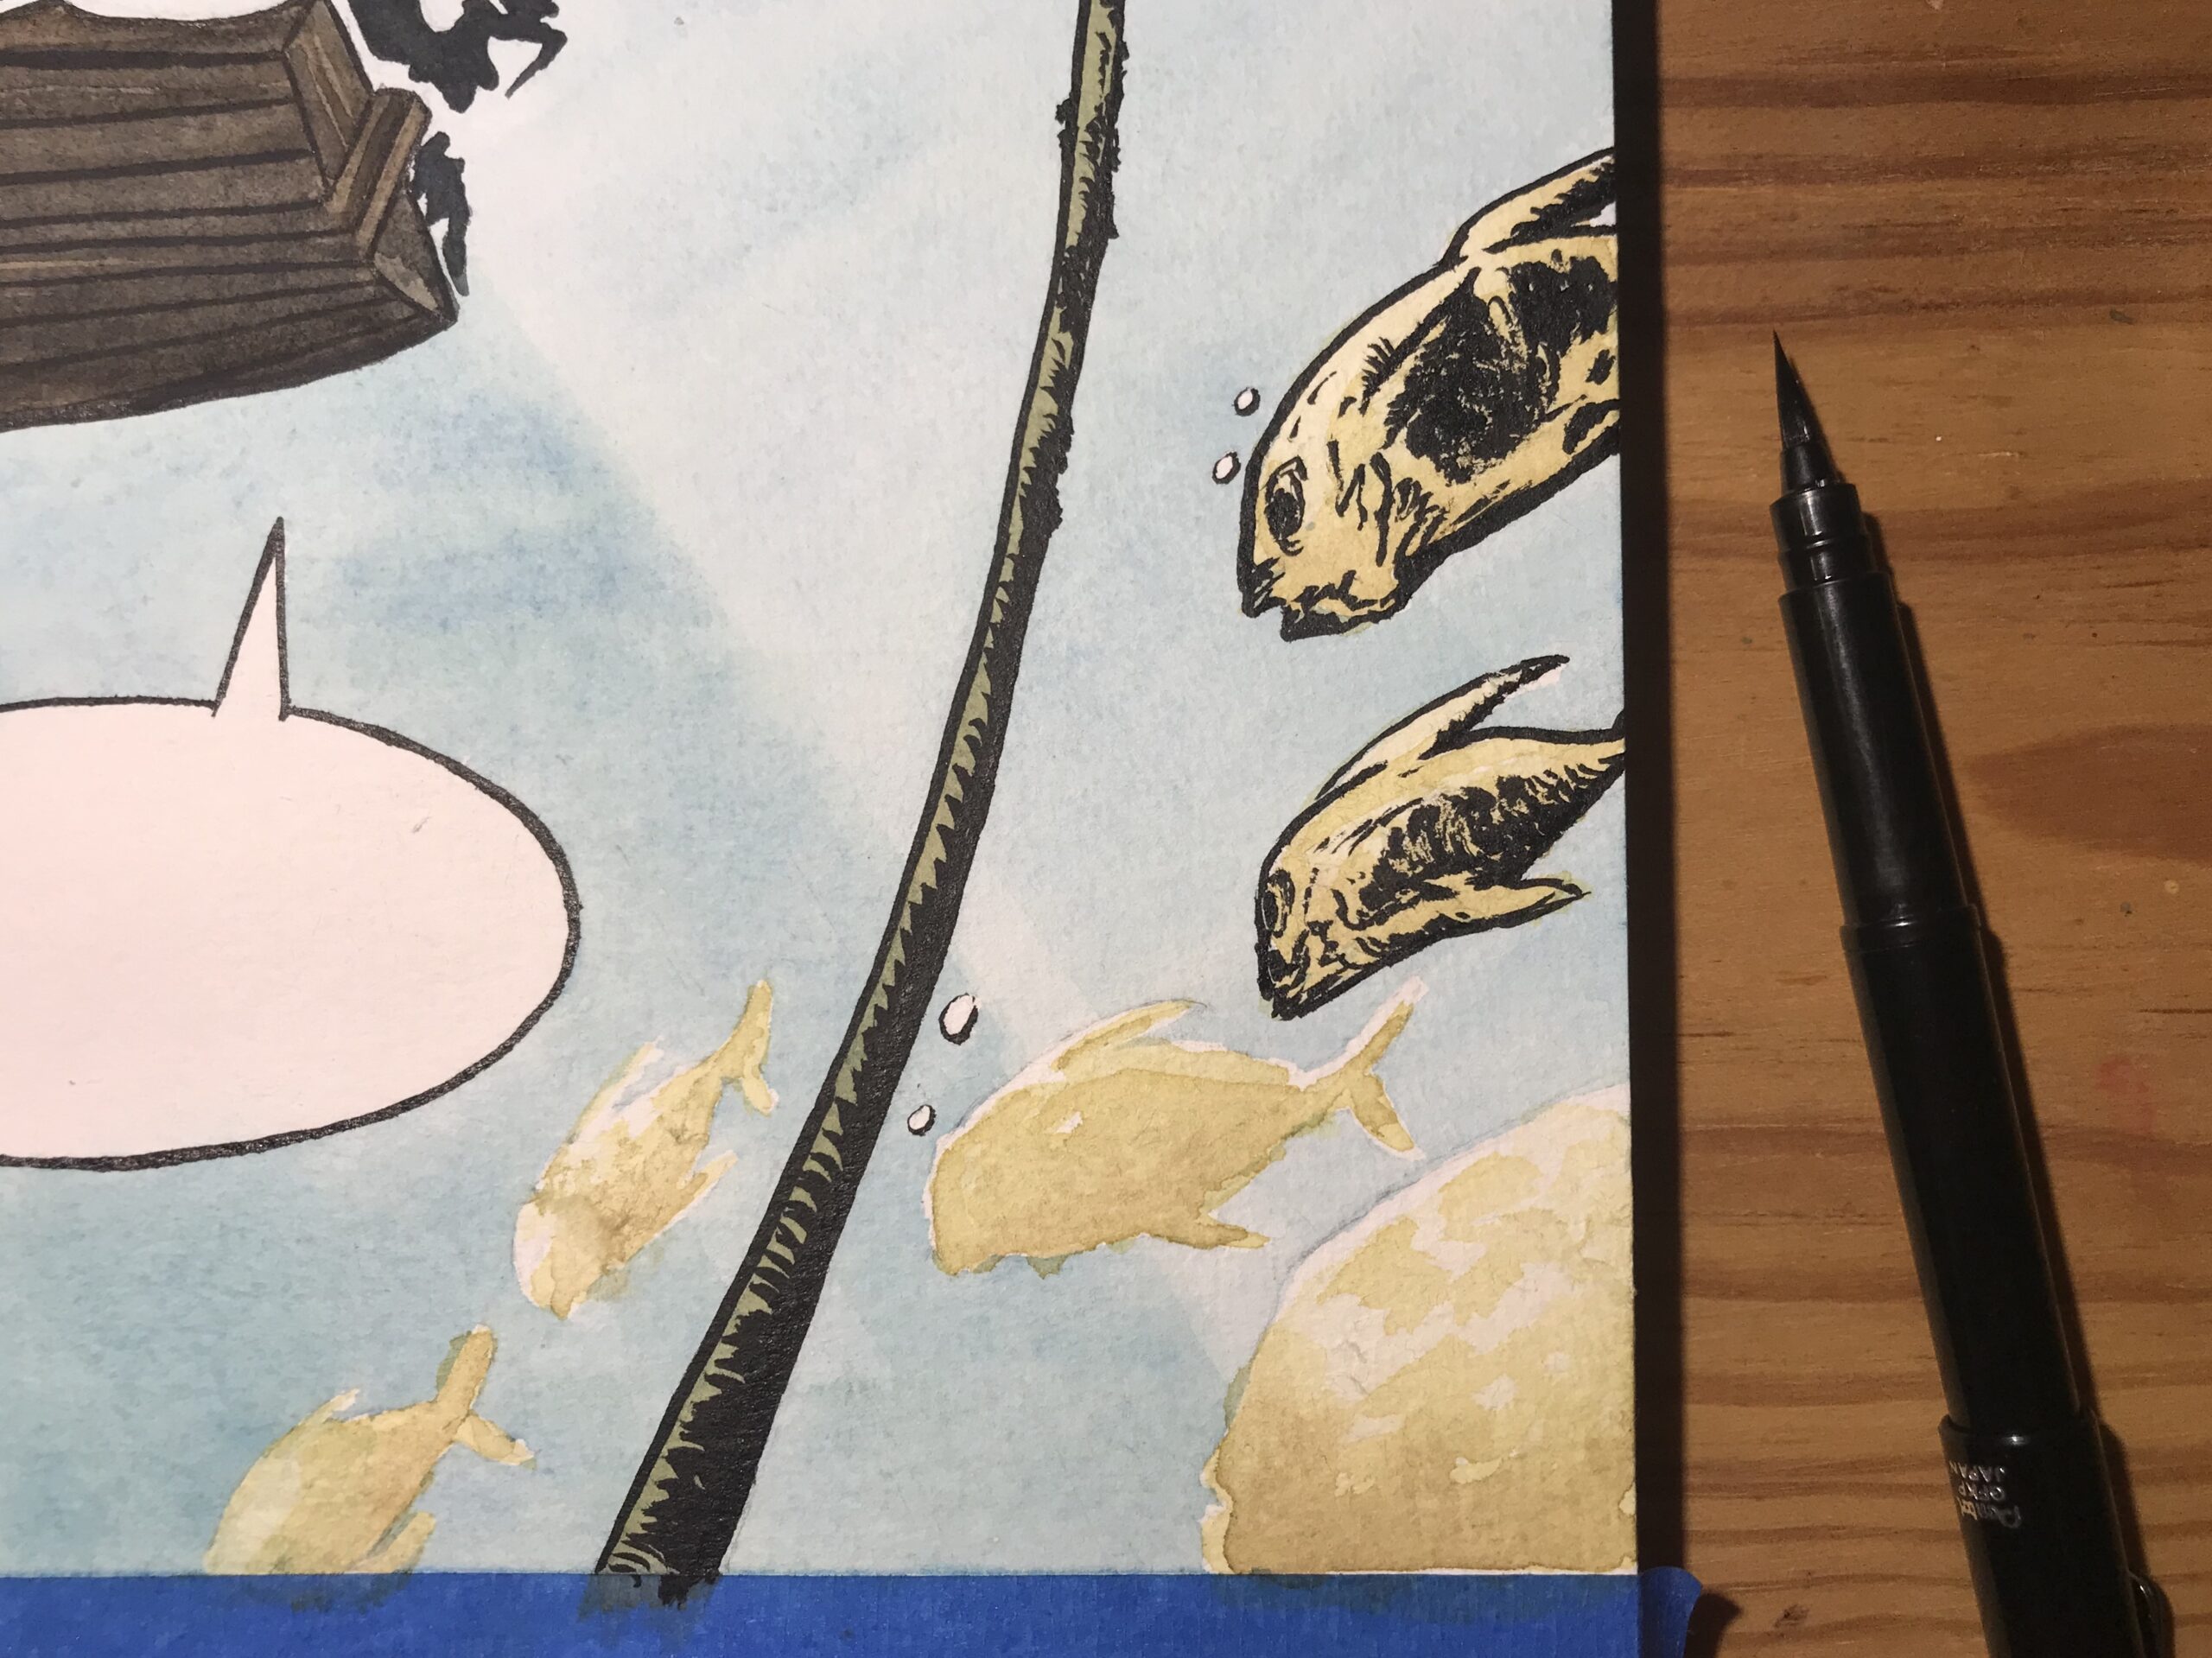 Detailing the fish using a Pentel black ink brushpen which is visible next to the sheet.